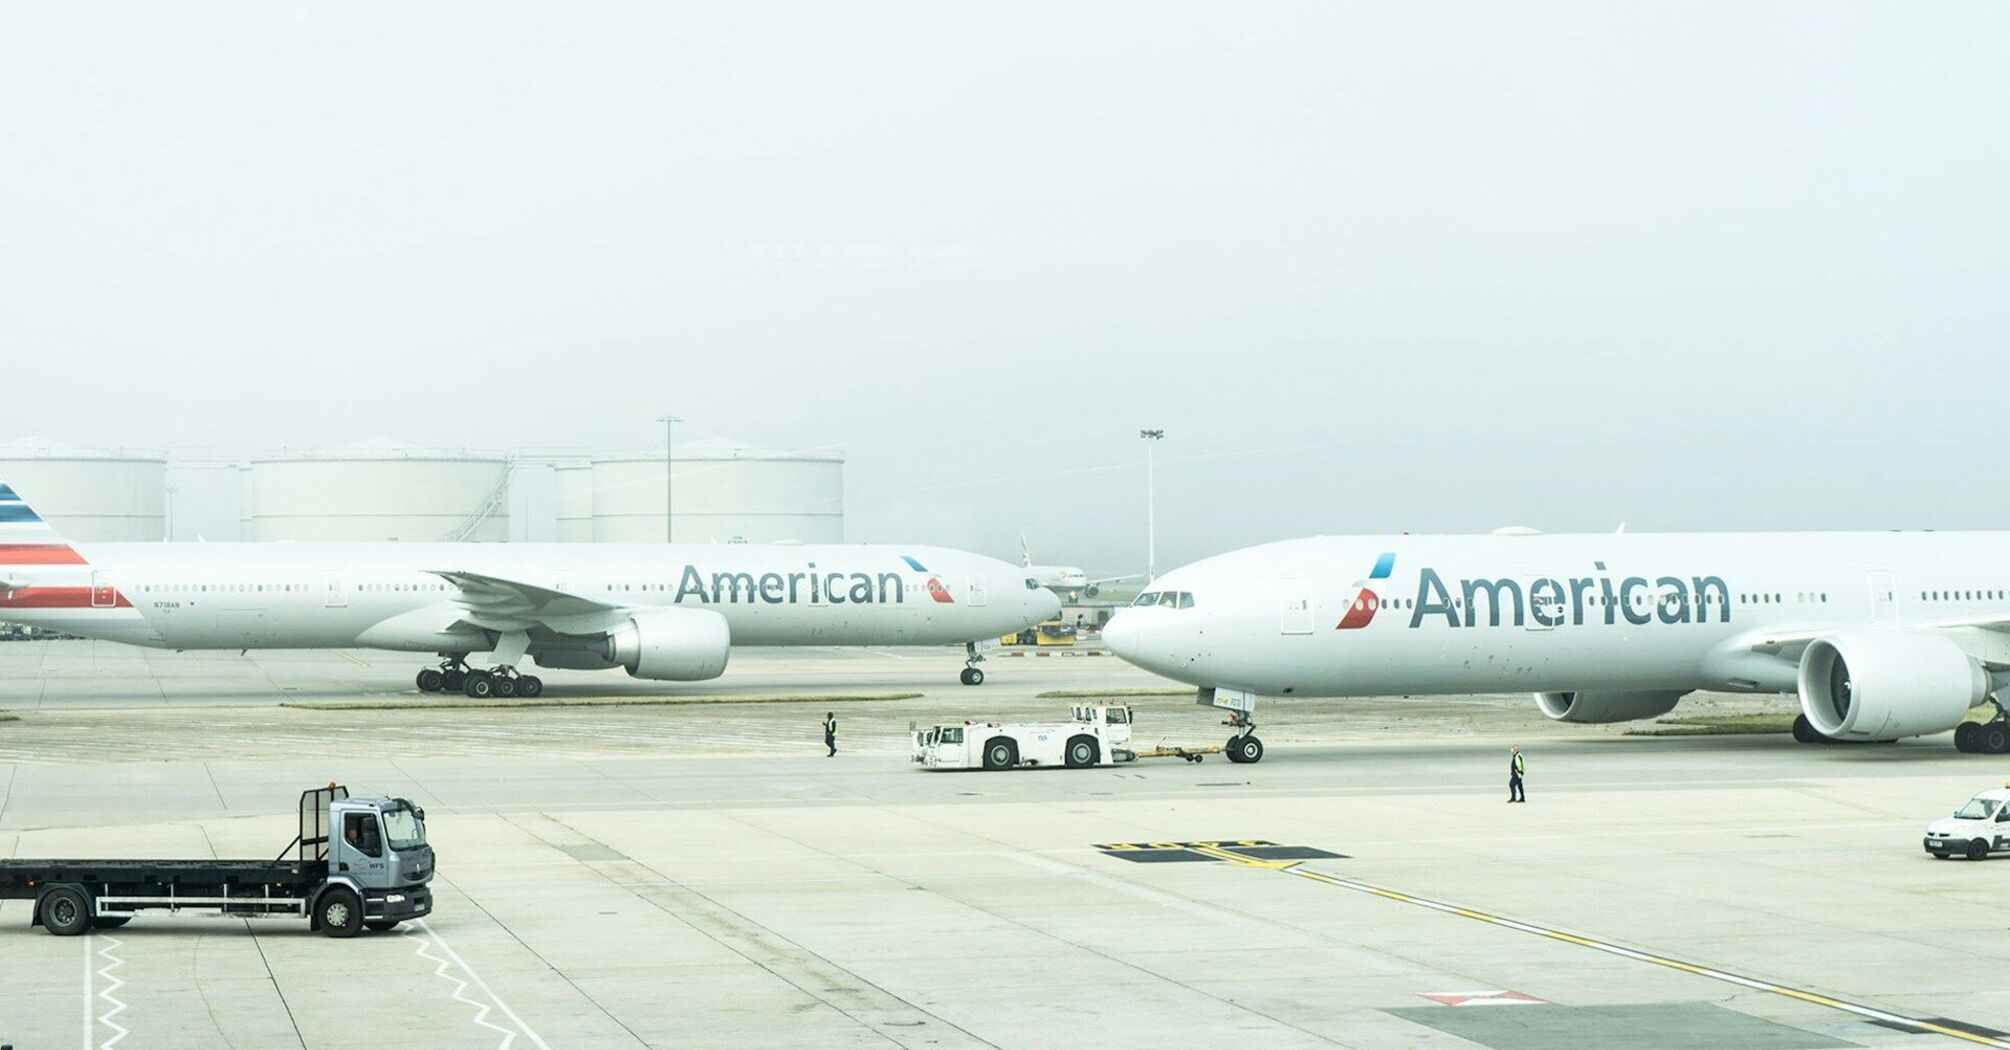 Two American Airlines aircraft parked at an airport on a hazy day with ground vehicles in the foreground